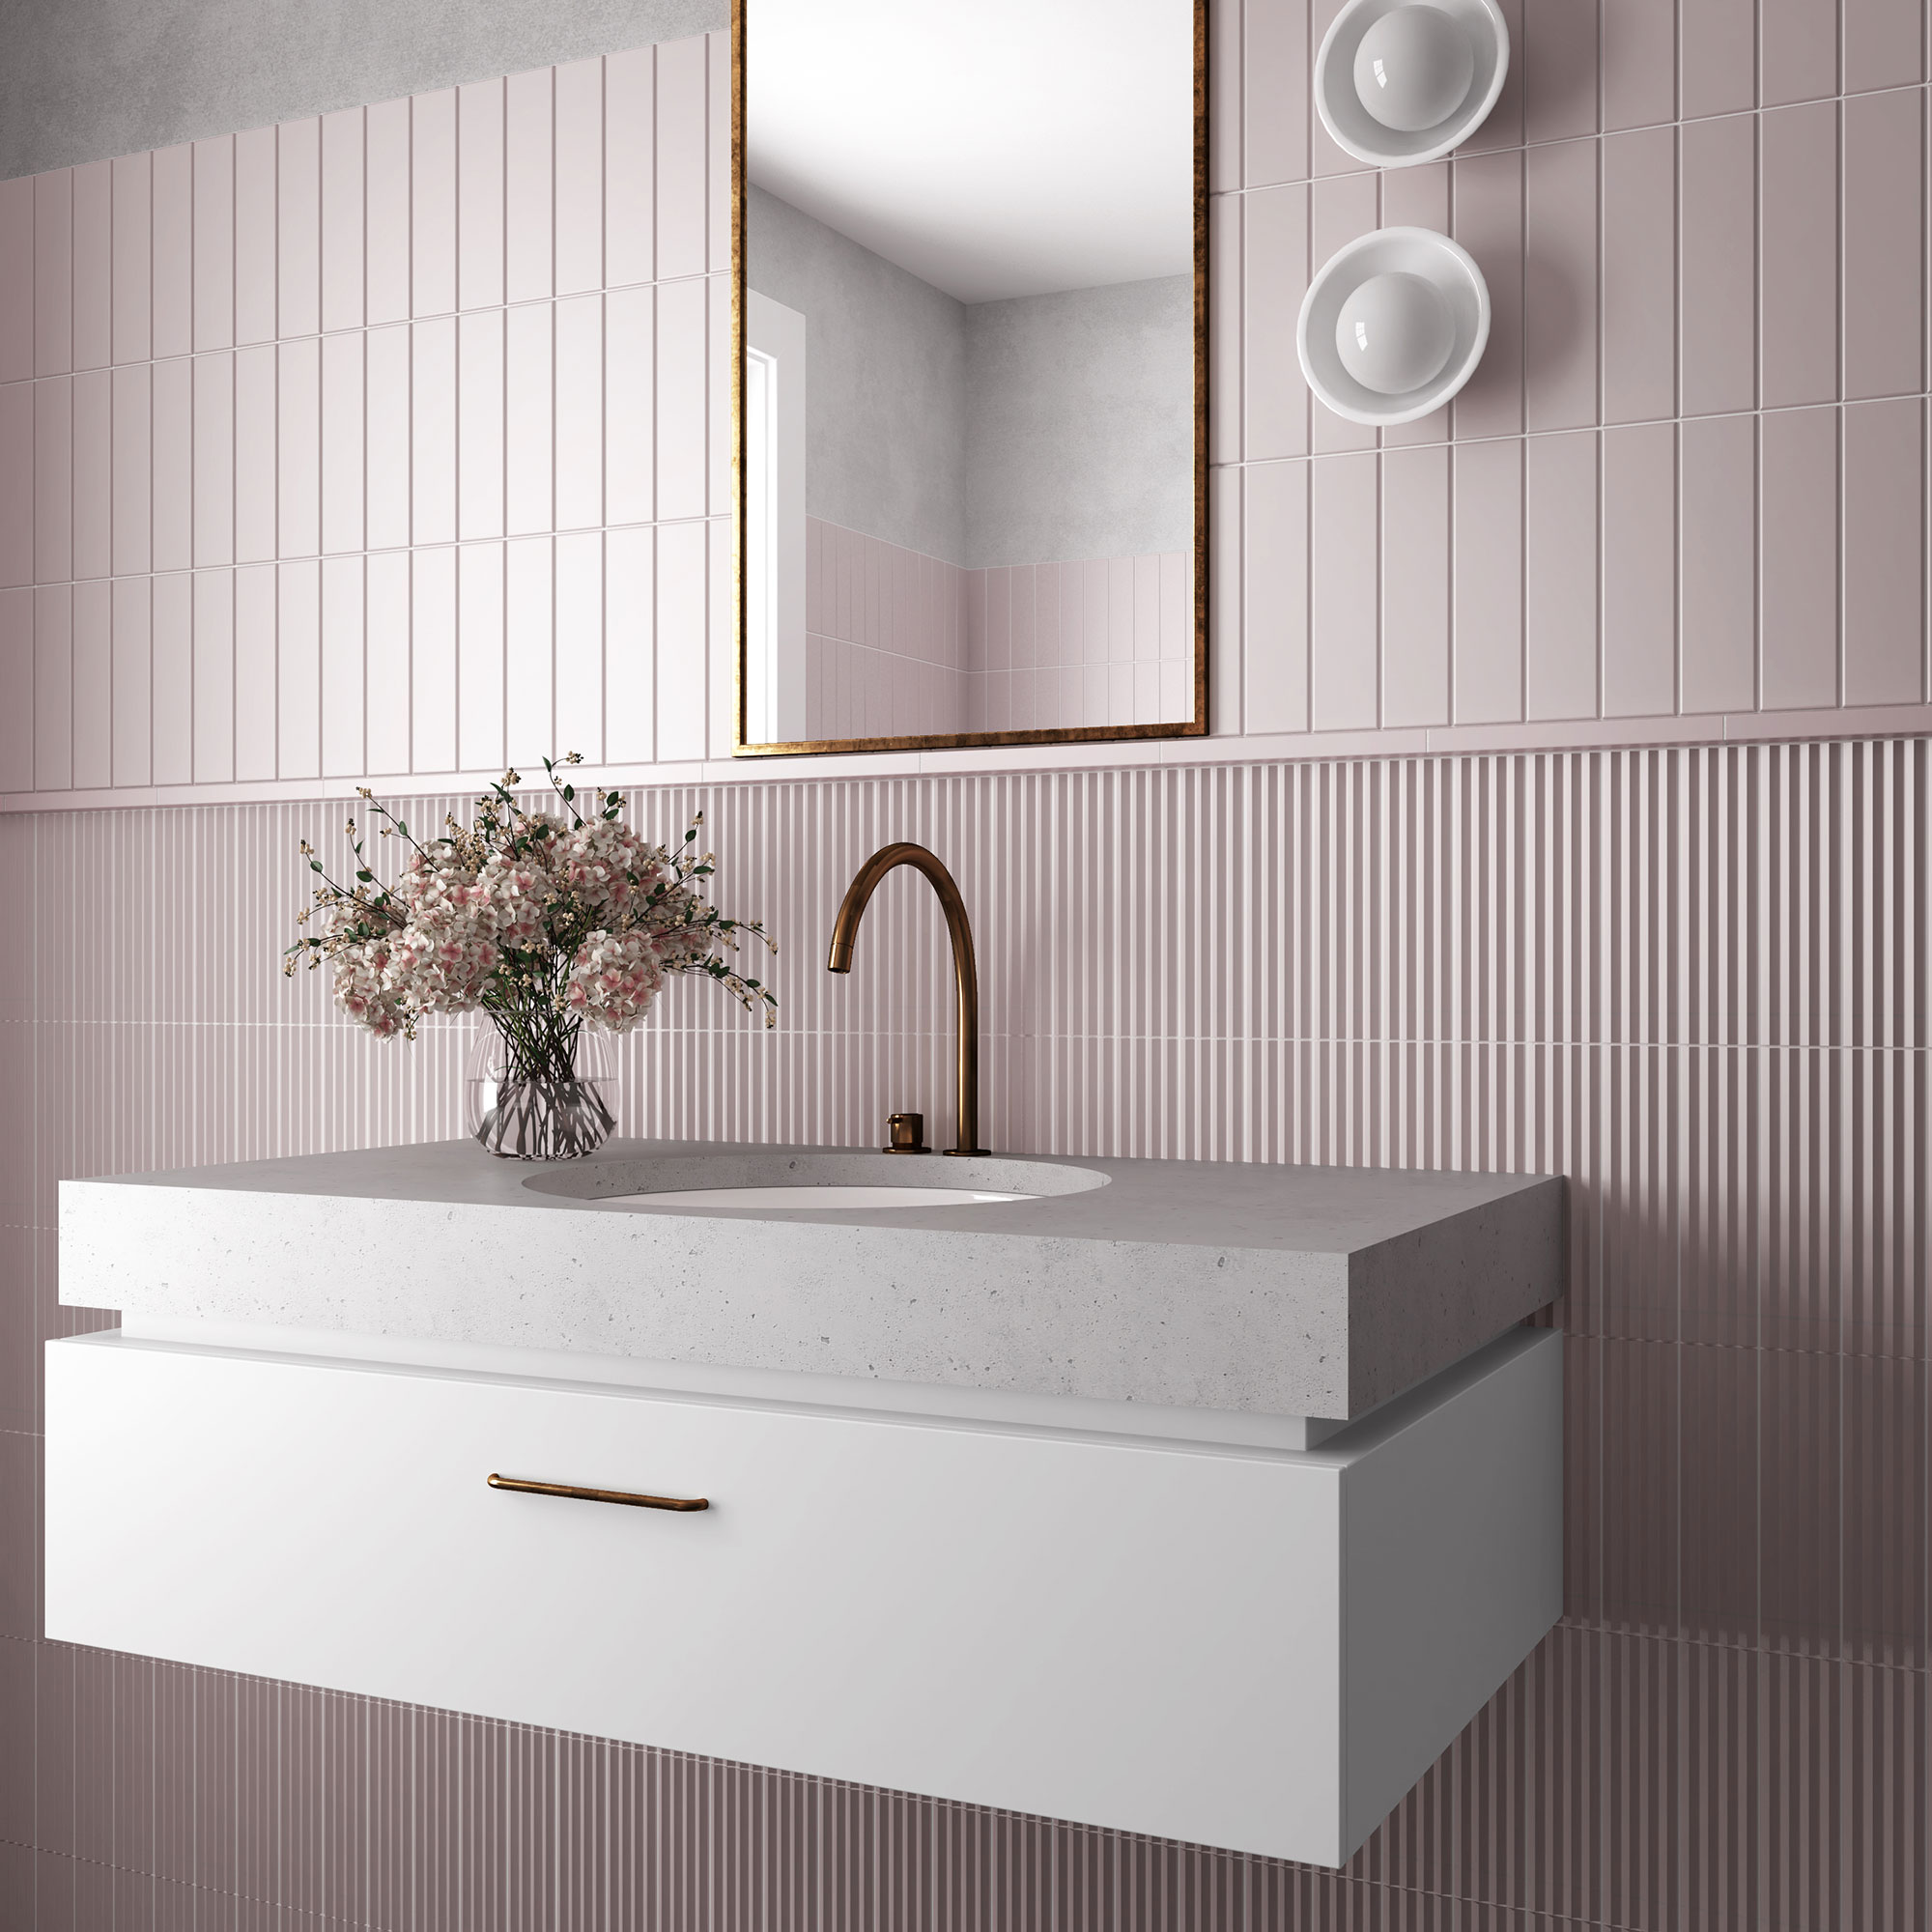 4 bathroom colors falling out of fashion for 2023